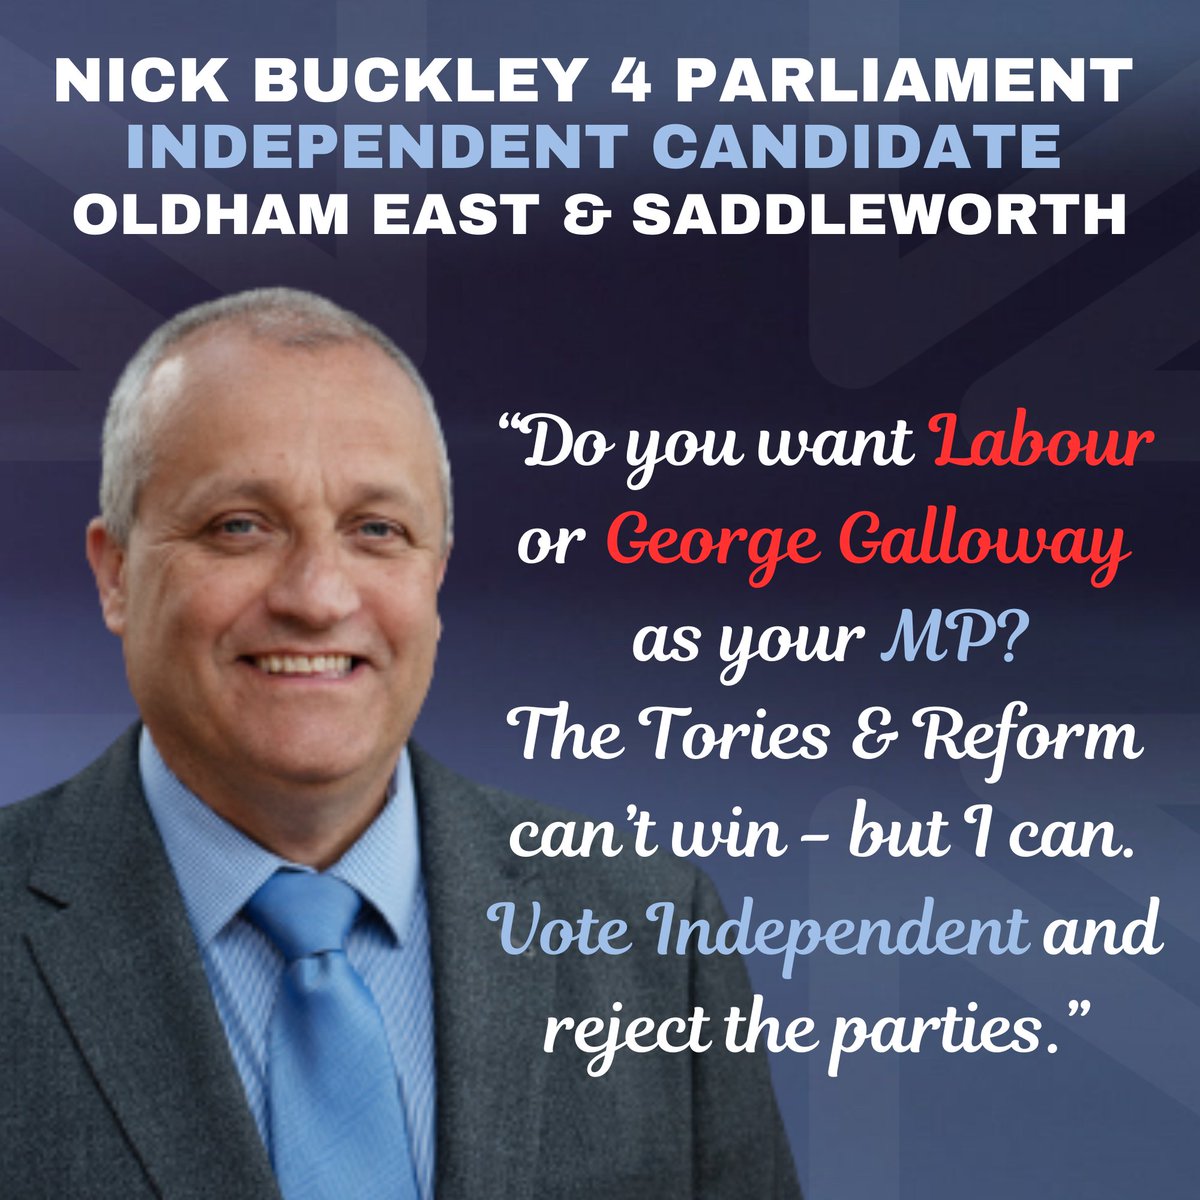 Please share in all Oldham & Saddleworth groups, lists and with family and friends. Change is coming in 6 weeks to the UK - let us make sure it is in our favour and will deliver benefits to us and our country. #NickBuckley4Parliament #Oldham #Saddleworth @recusant_raja